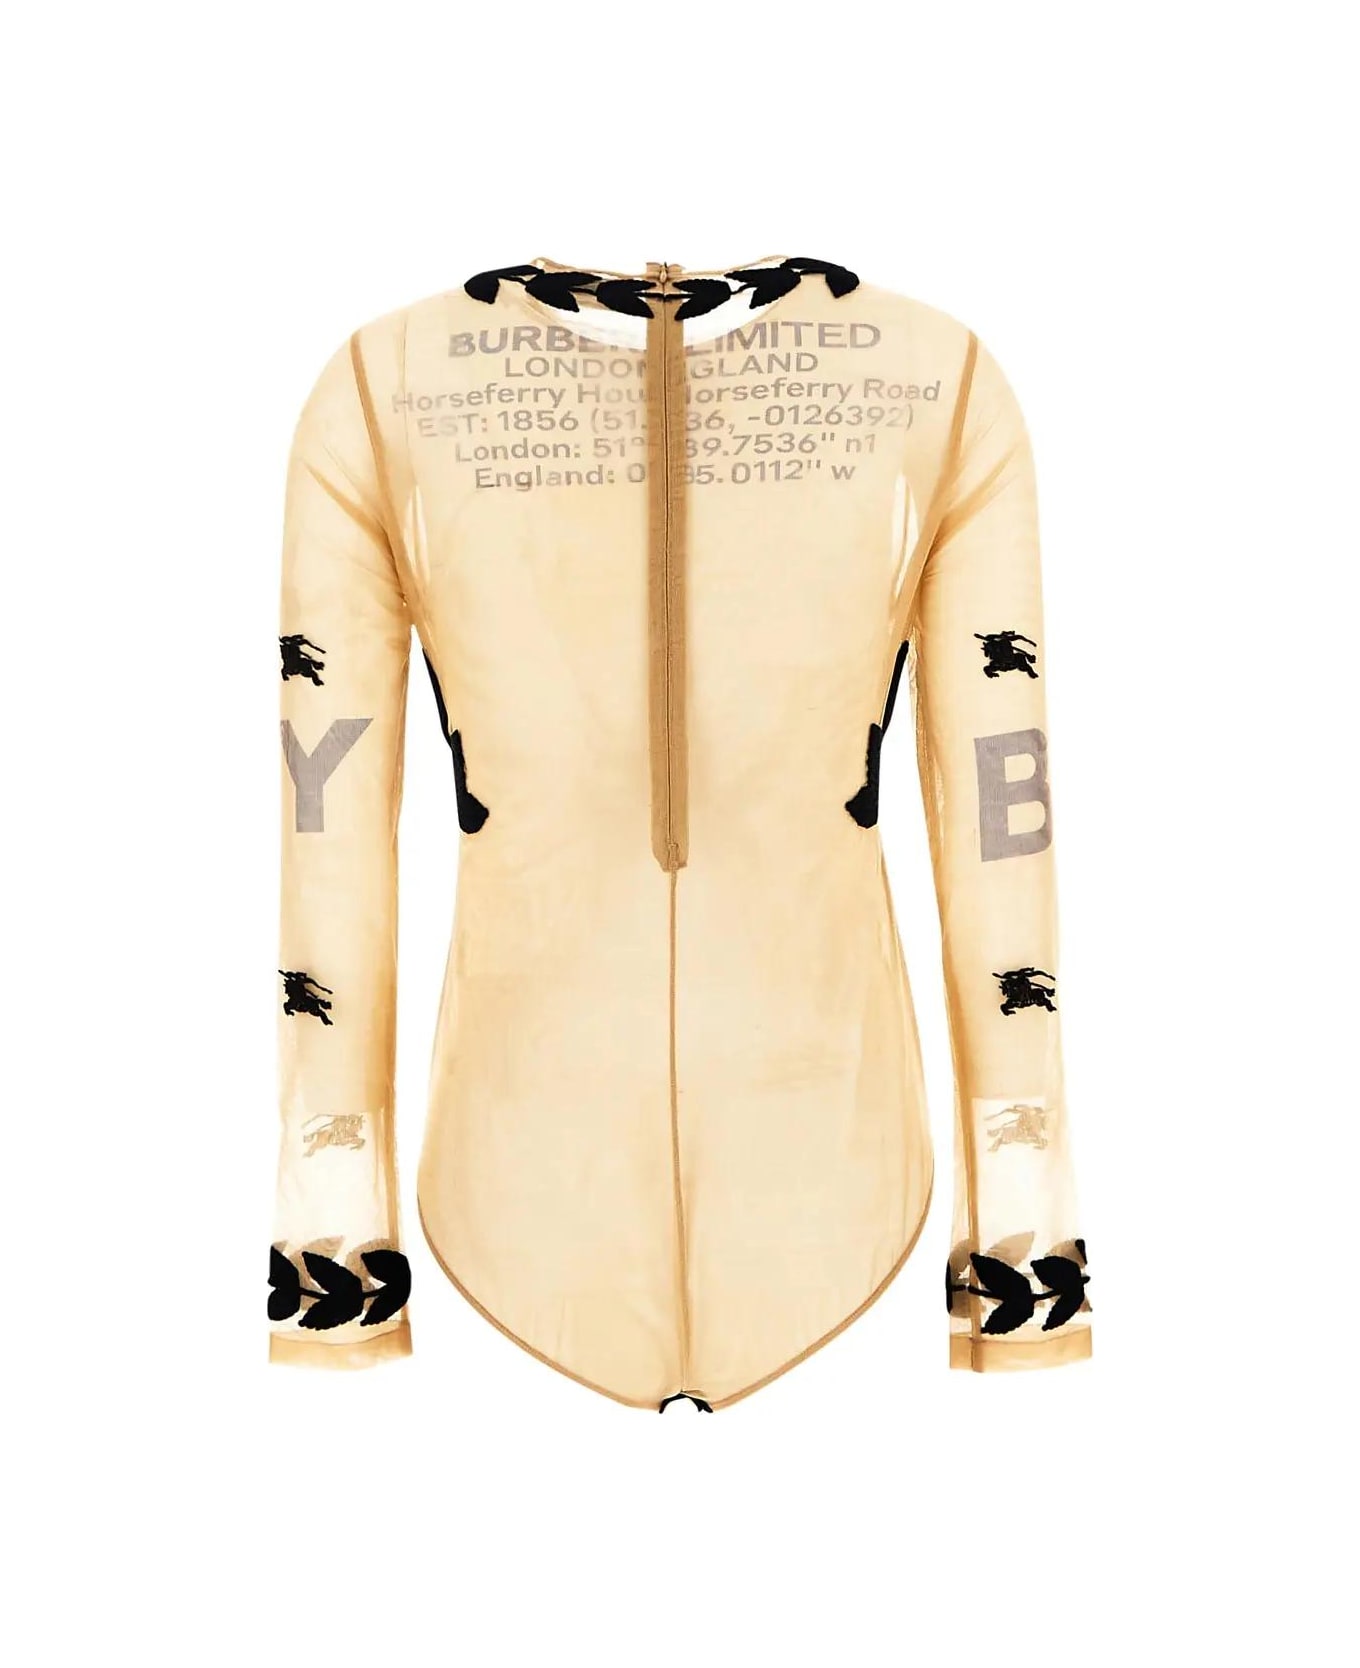 Burberry Ekd Embroidered CanyonTM Tulle Bodysuit - Camel